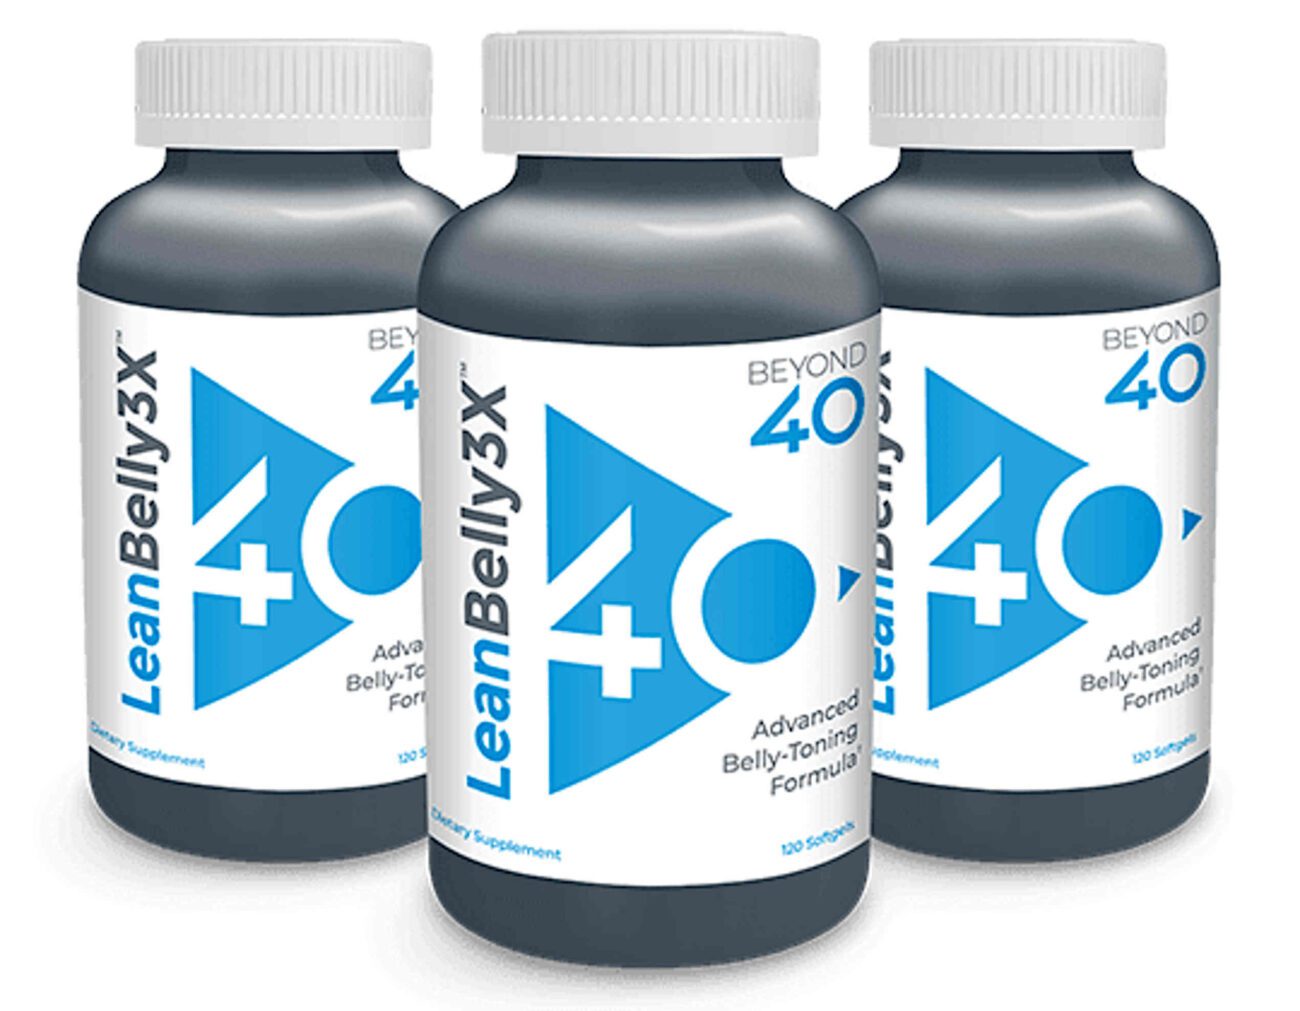 Thinking about buying Lean Belly 3X online? Take notes and see what your doctor says about these fast-acting weight loss supplements!